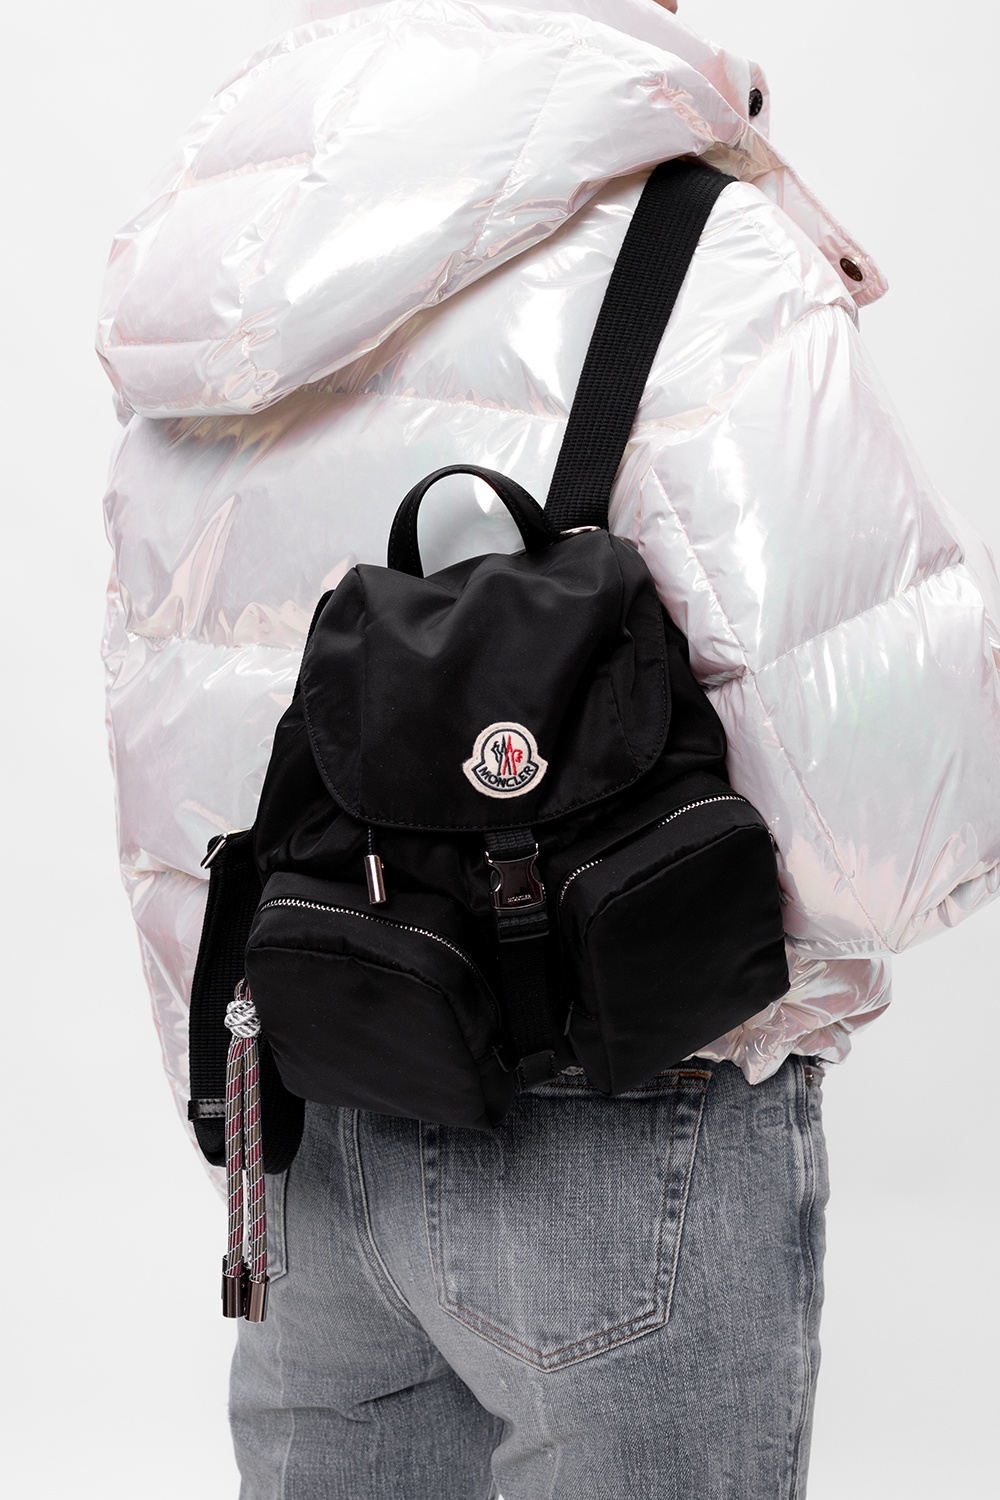 Moncler, Bags, Nwot Moncler Dauphine Tech Fabric Backpack